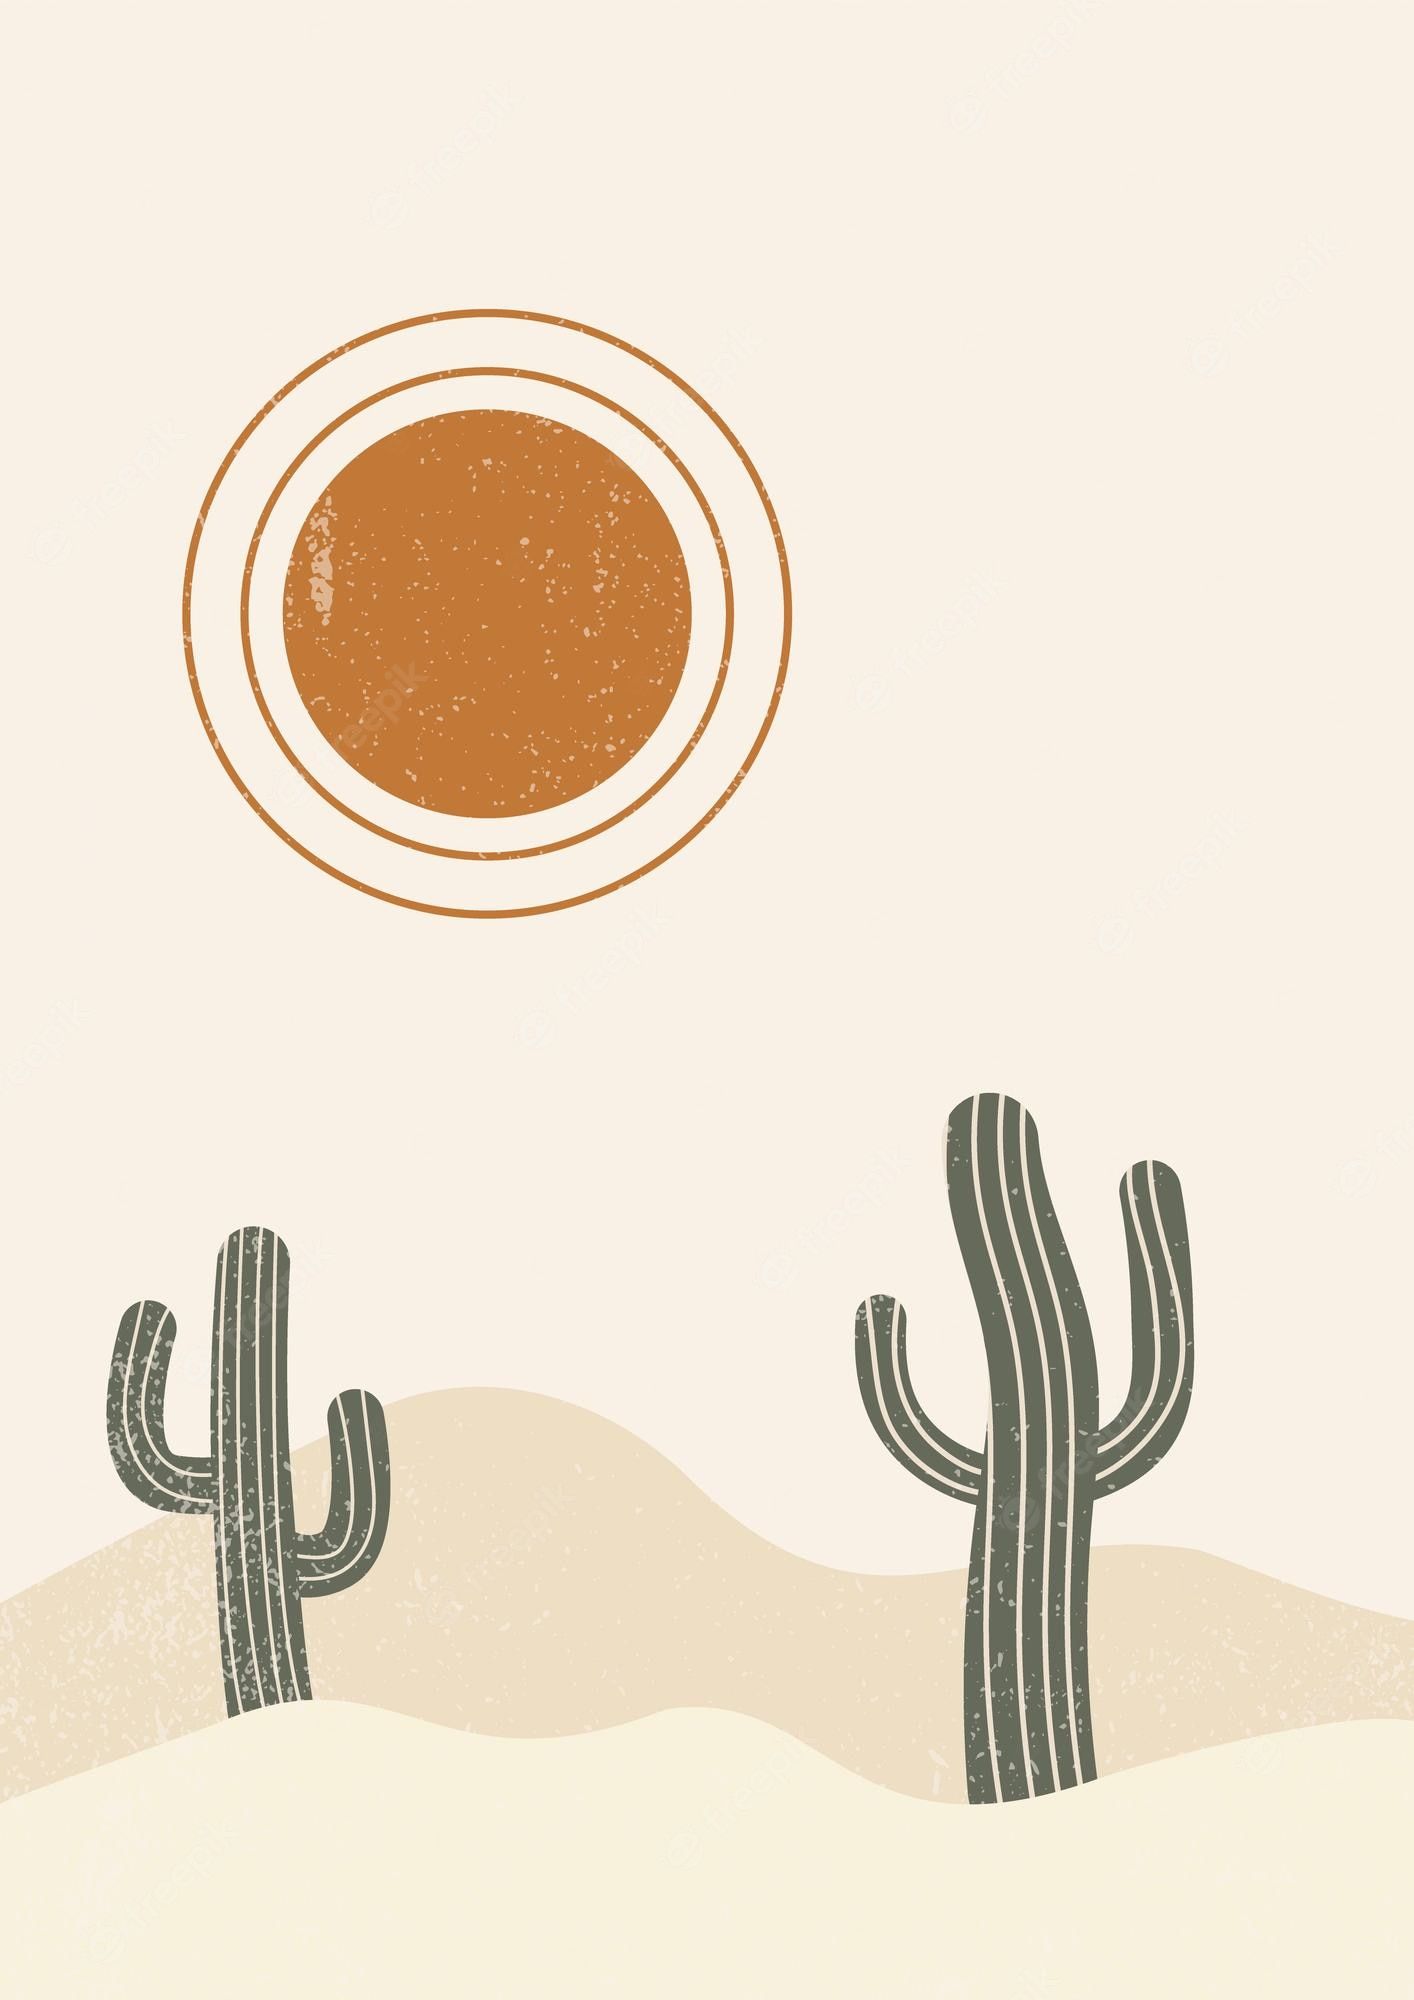 Download this free desert inspired SVG cut file to make your own DIY home decor. - Cactus